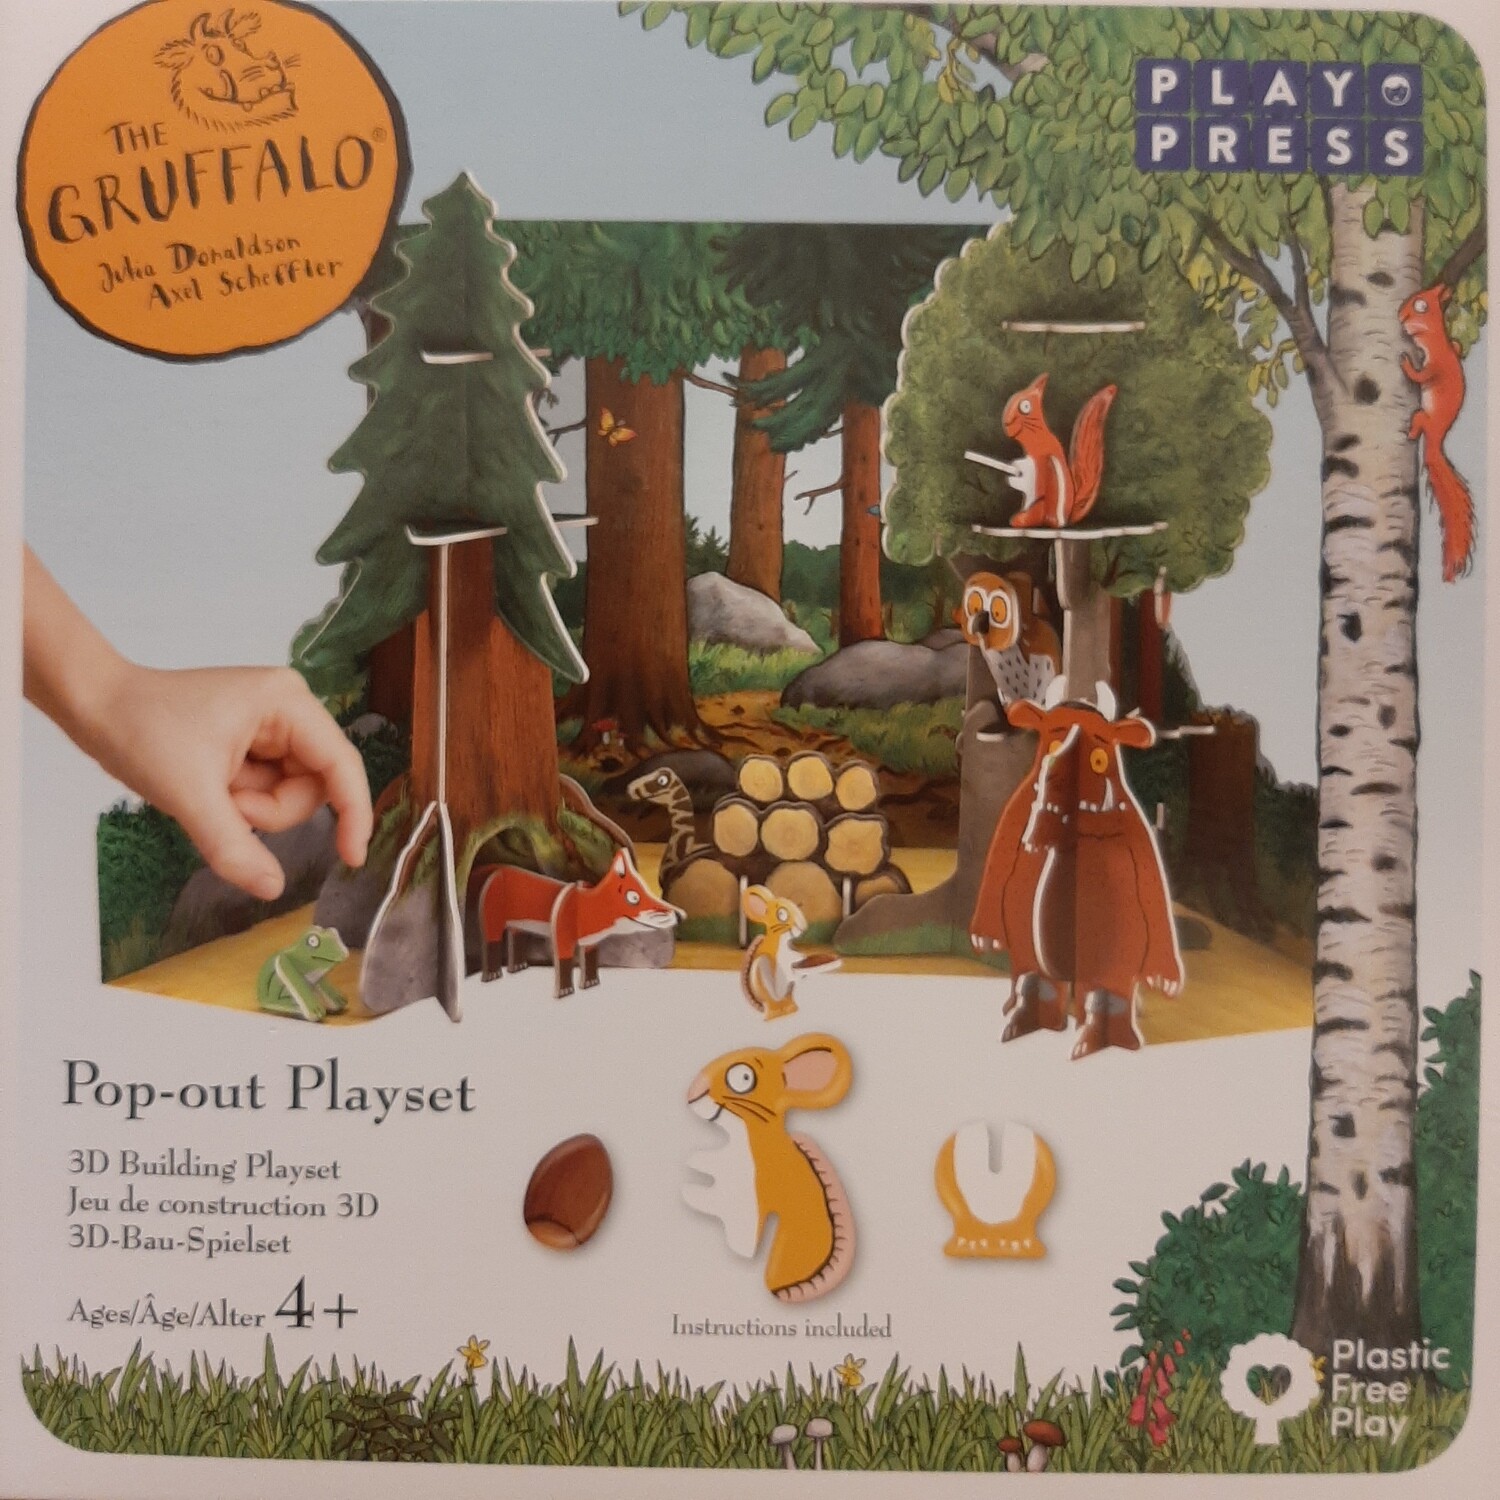 The Gruffalo Pop-Out Playset